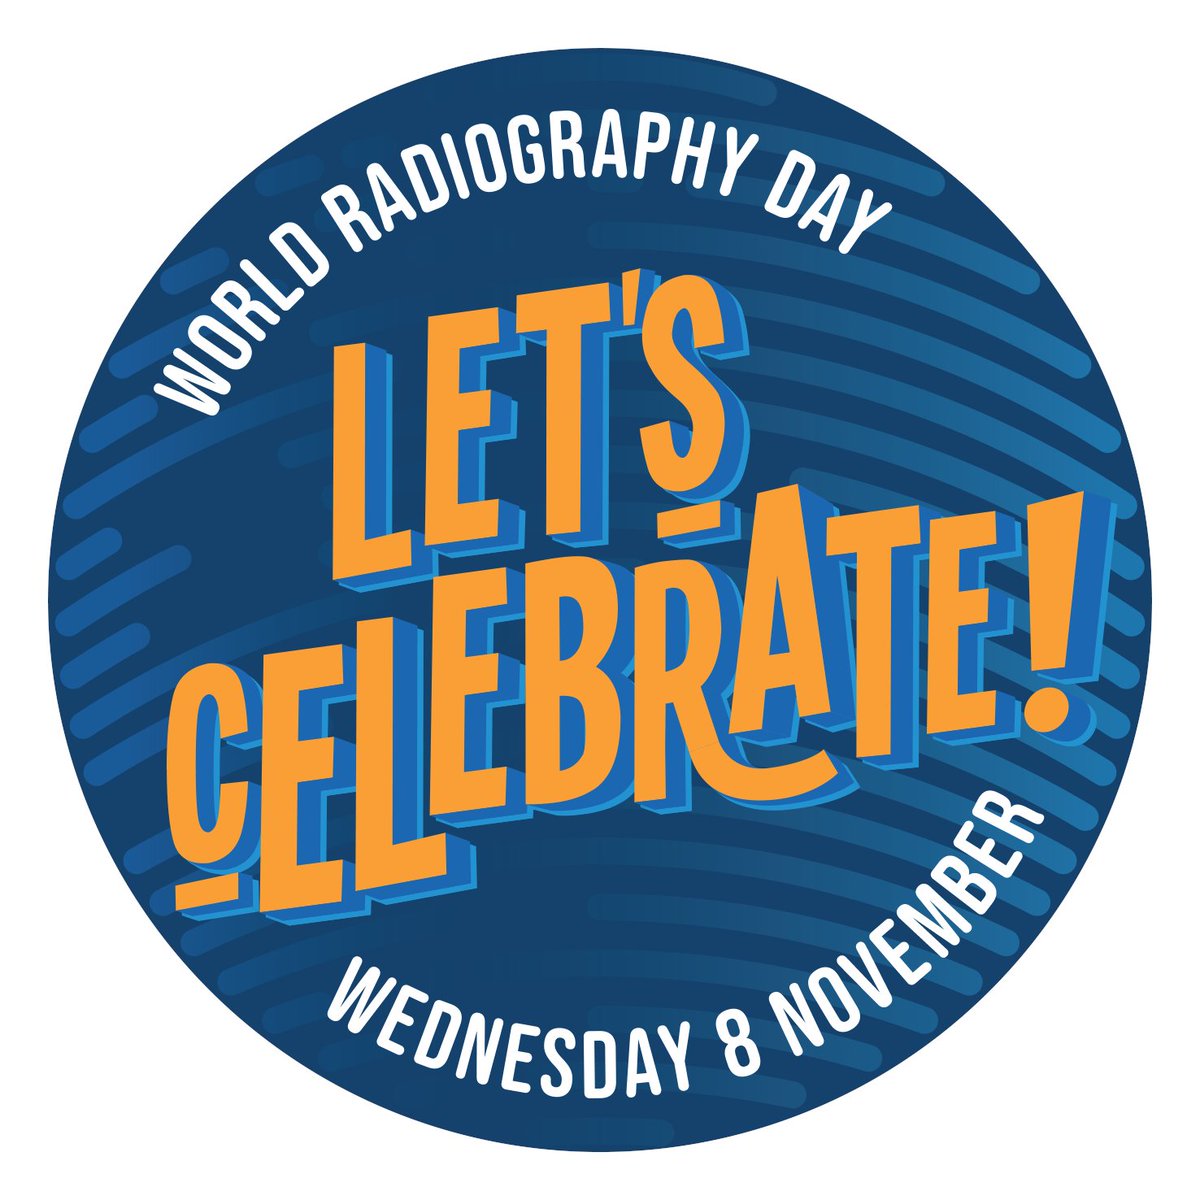 A huge thank you to all ASMIRT members. Today is your day to shine and appreciate your central role in the healthcare system. Share your celebrations today and the rest of this week at #asmirtorg #NRRTW #WorldRadiographyDay